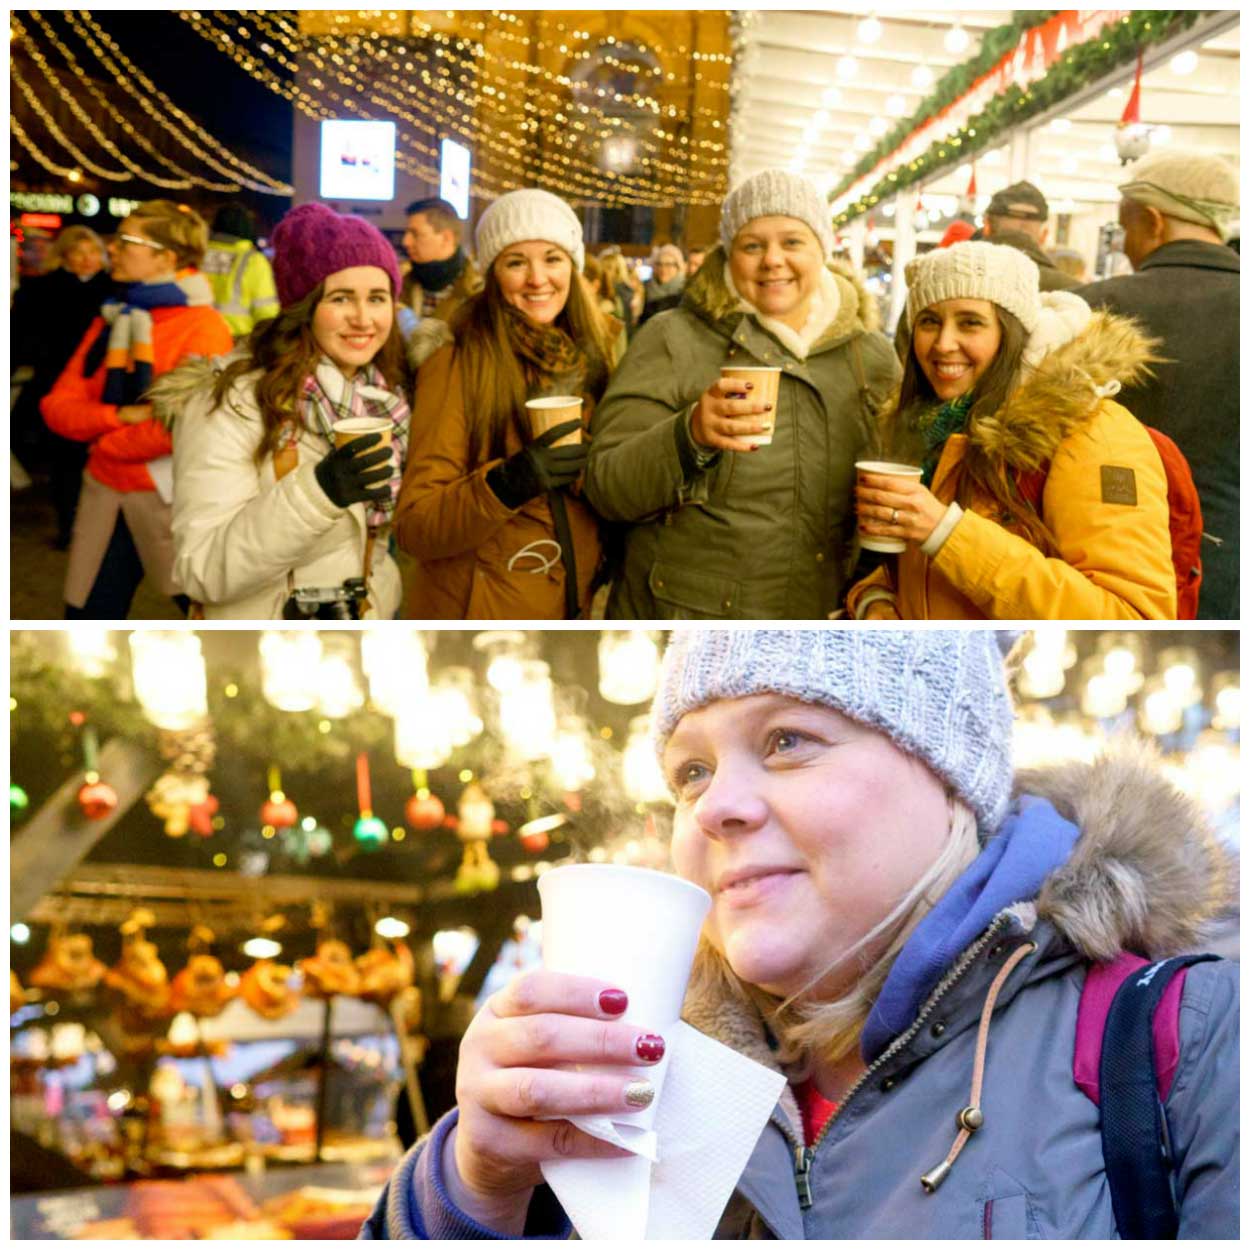 A collage of drinking Kinder Punch at a Christmas market